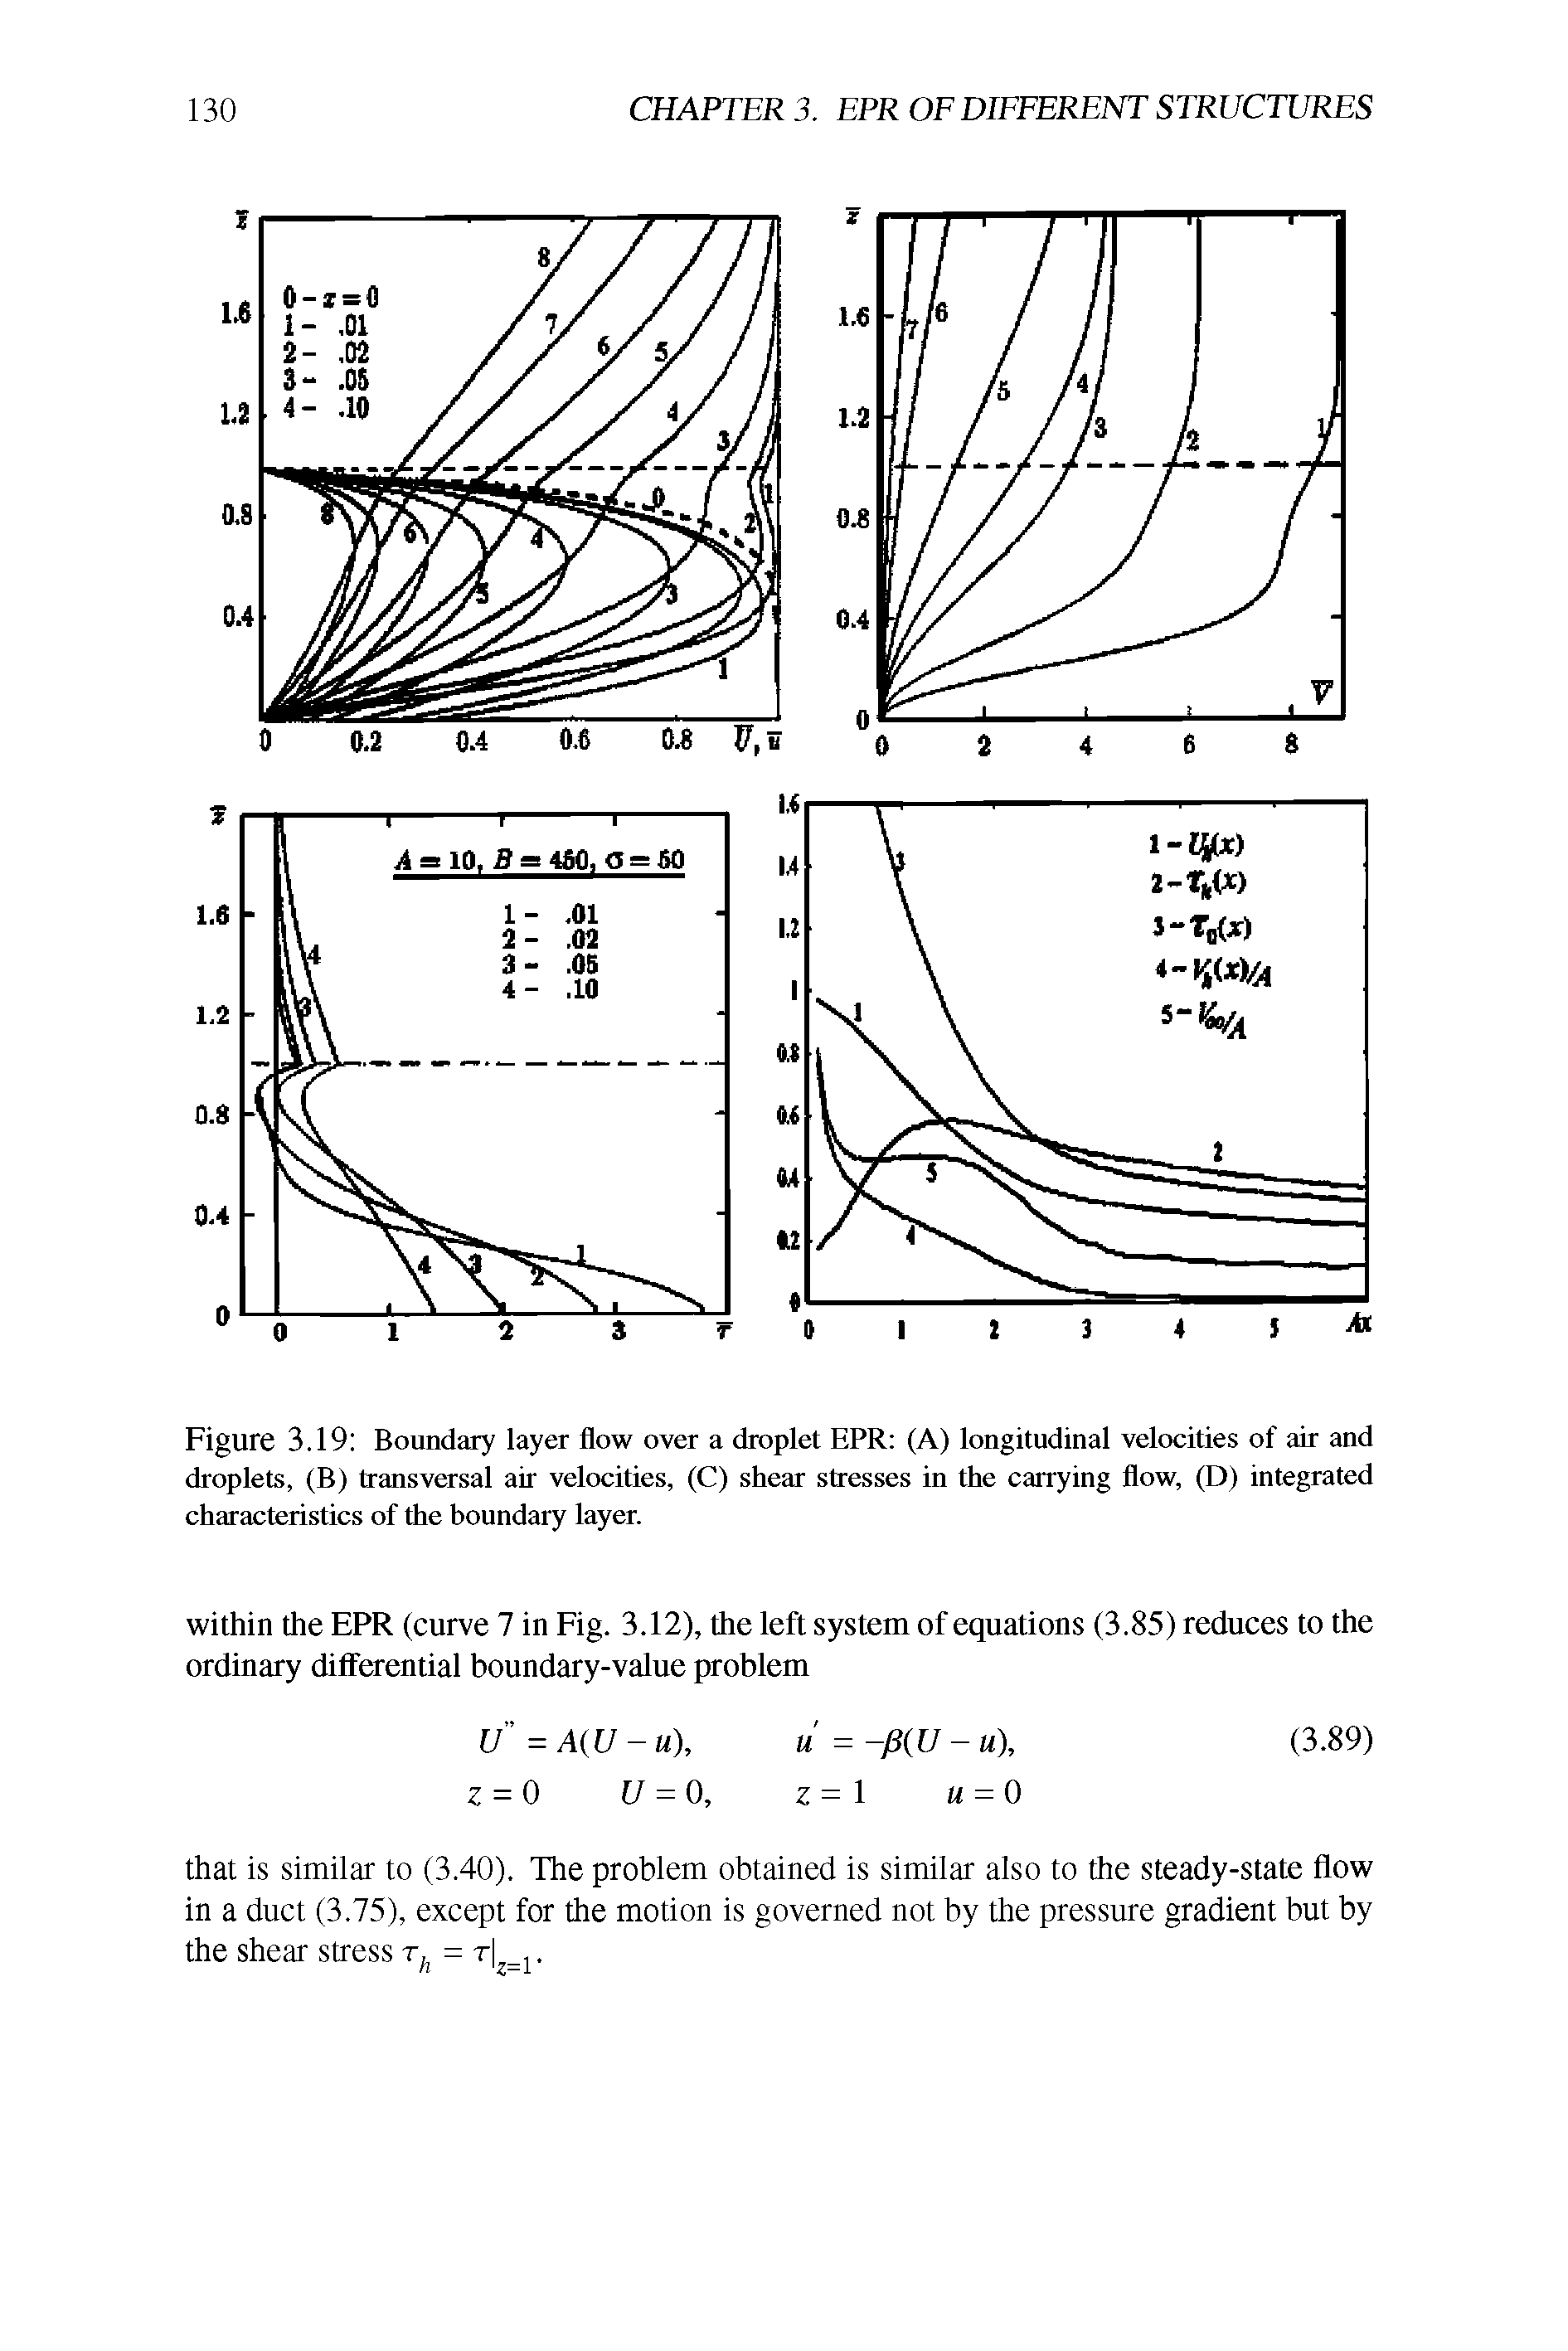 Figure 3.19 Boundary layer flow over a droplet EPR (A) longitudinal velocities of air and droplets, (B) transversal air velocities, (C) shear stresses in the carrying flow, (D) integrated characteristics of the boundary layer.